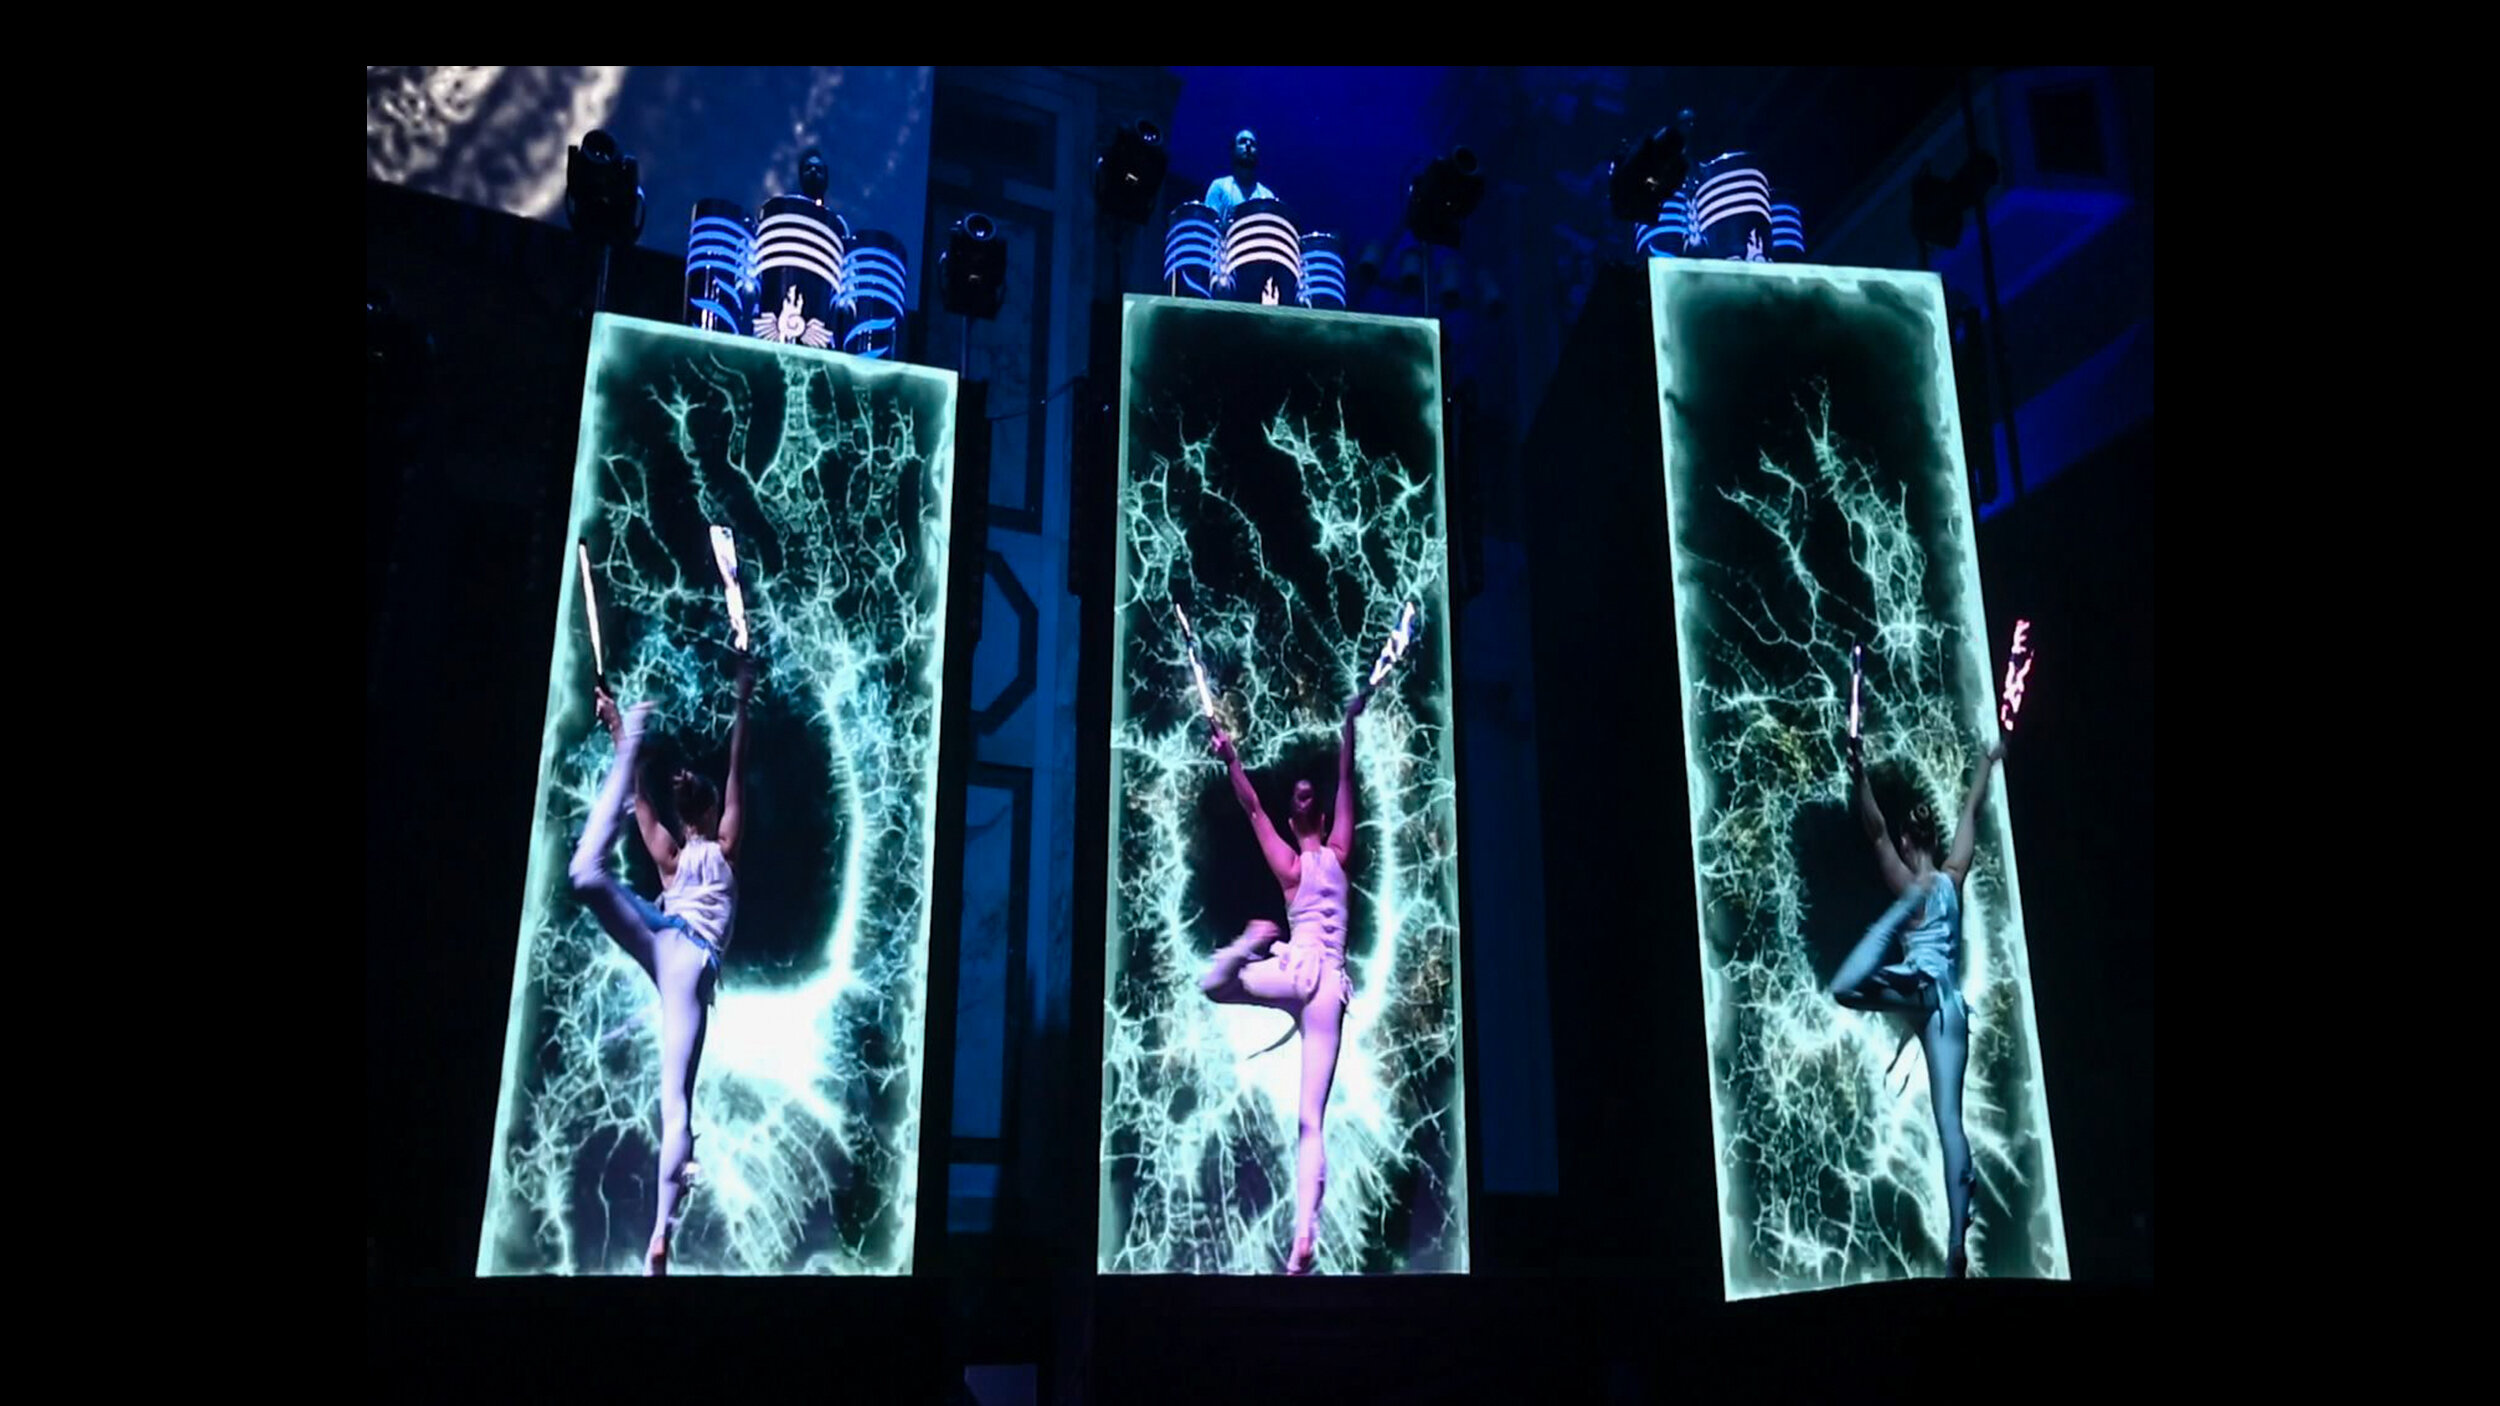 LED Dancers With Interactive Background Media, Pioneers Festival, Vienna, Austria